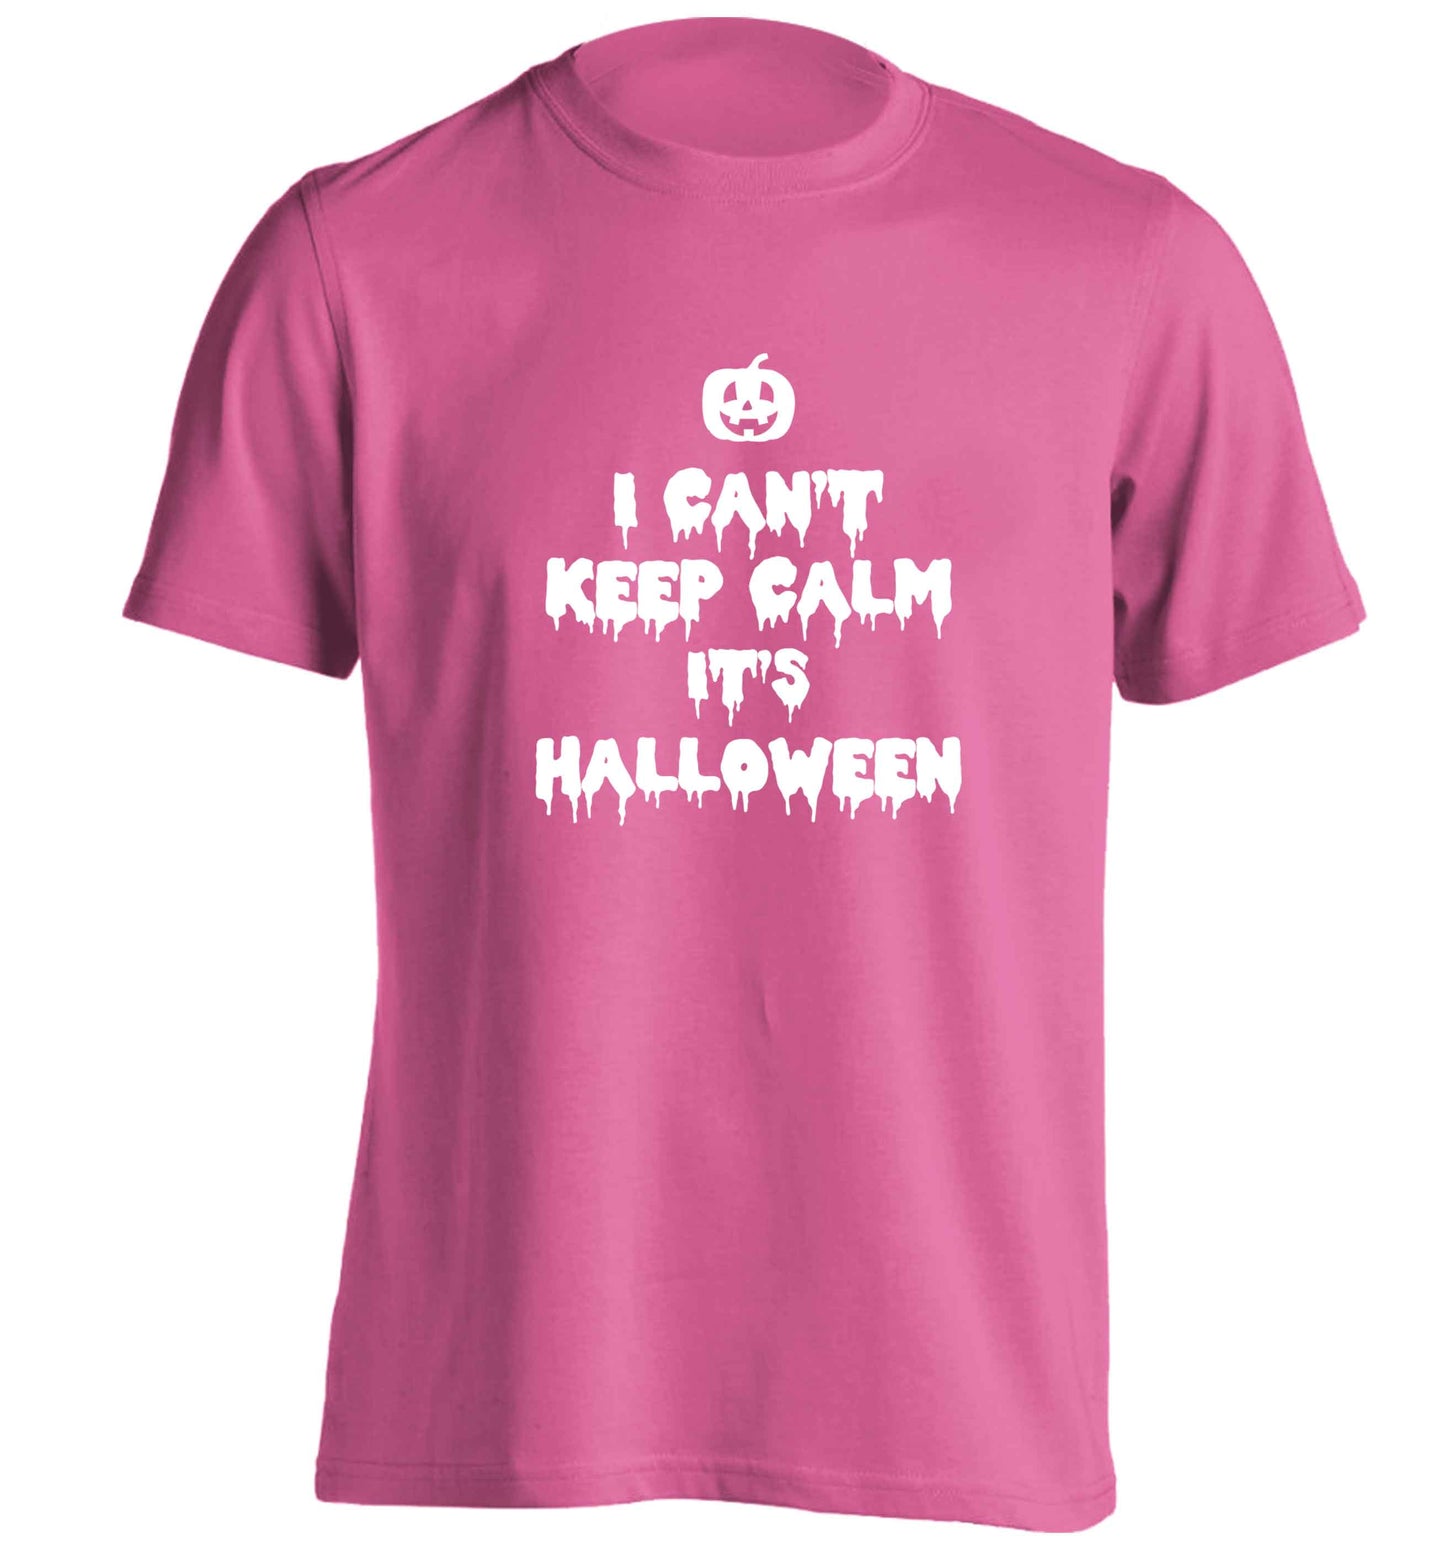 I can't keep calm it's halloween adults unisex pink Tshirt 2XL